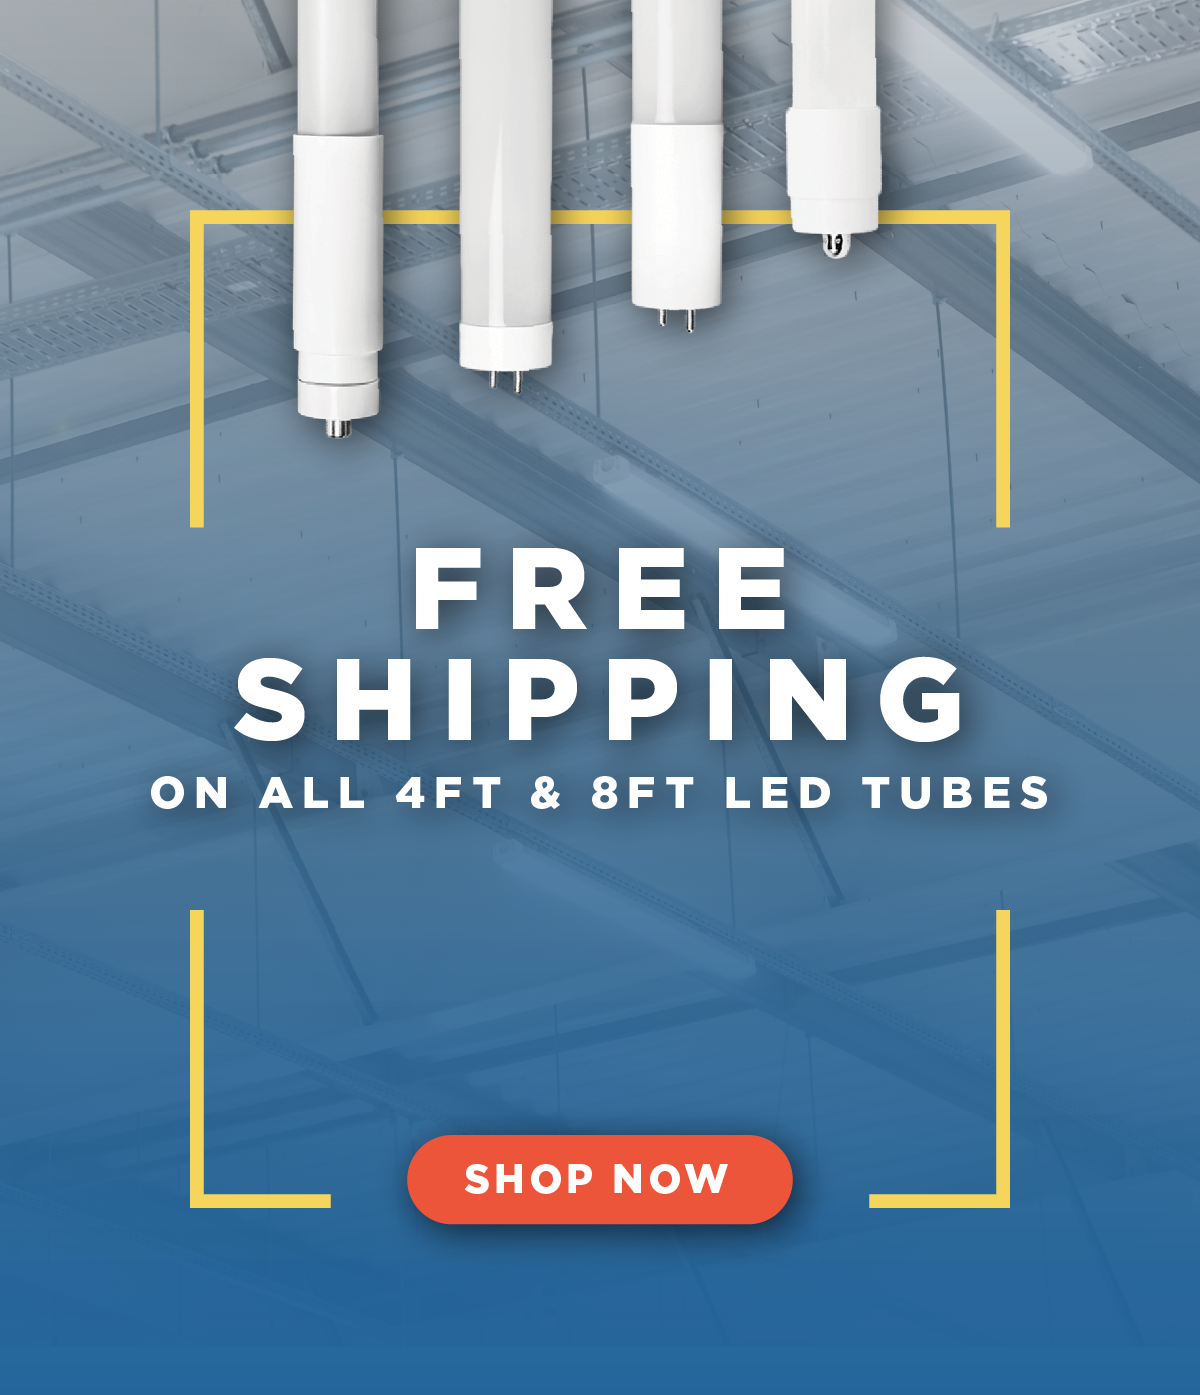 Free Shipping on All 4ft & 8ft tubes